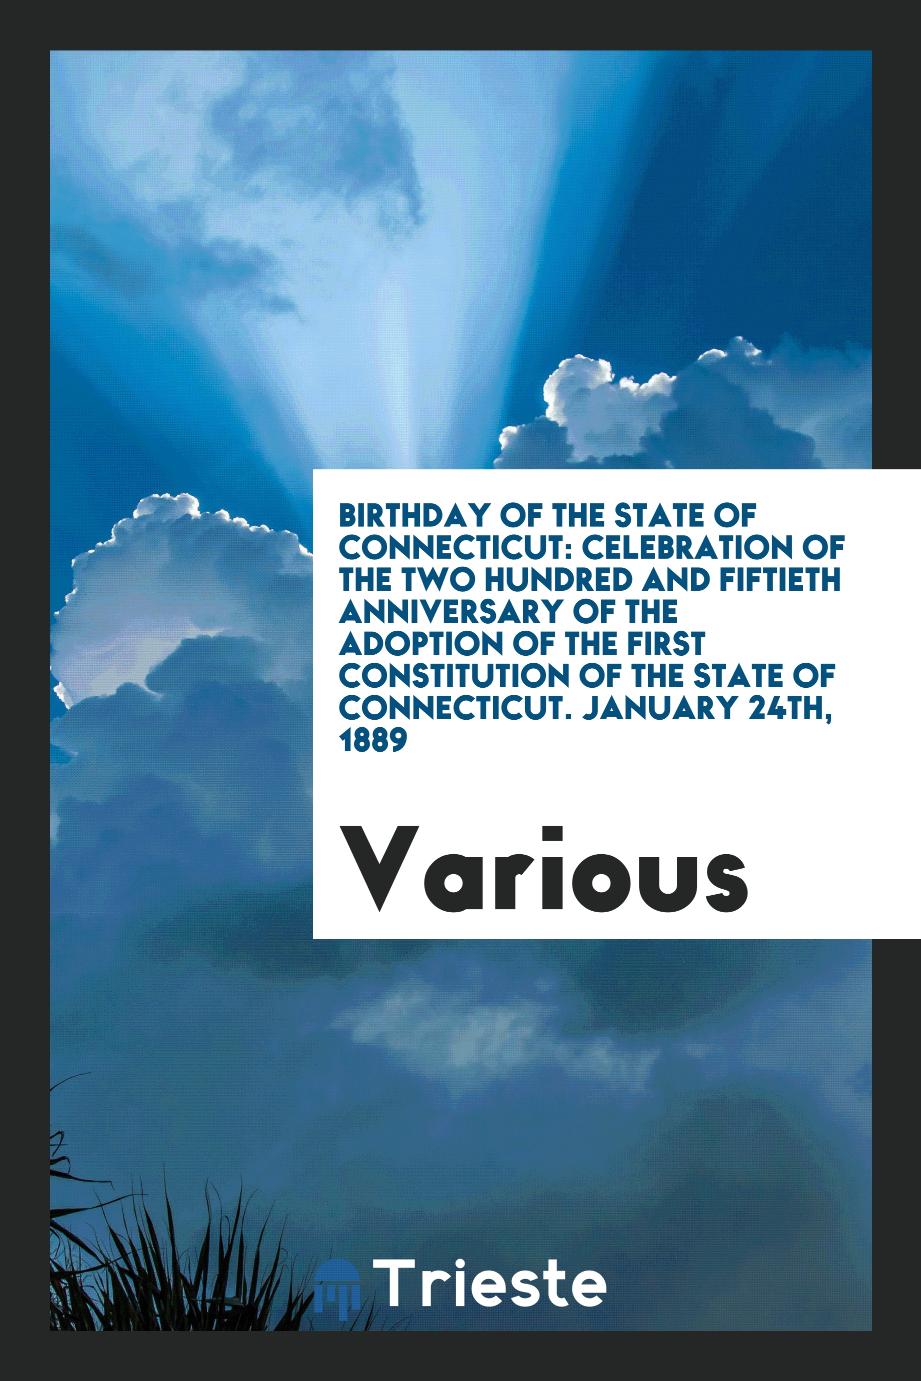 Birthday of the State of Connecticut: Celebration of the Two Hundred and Fiftieth Anniversary of the Adoption of the First Constitution of the State of Connecticut. January 24th, 1889